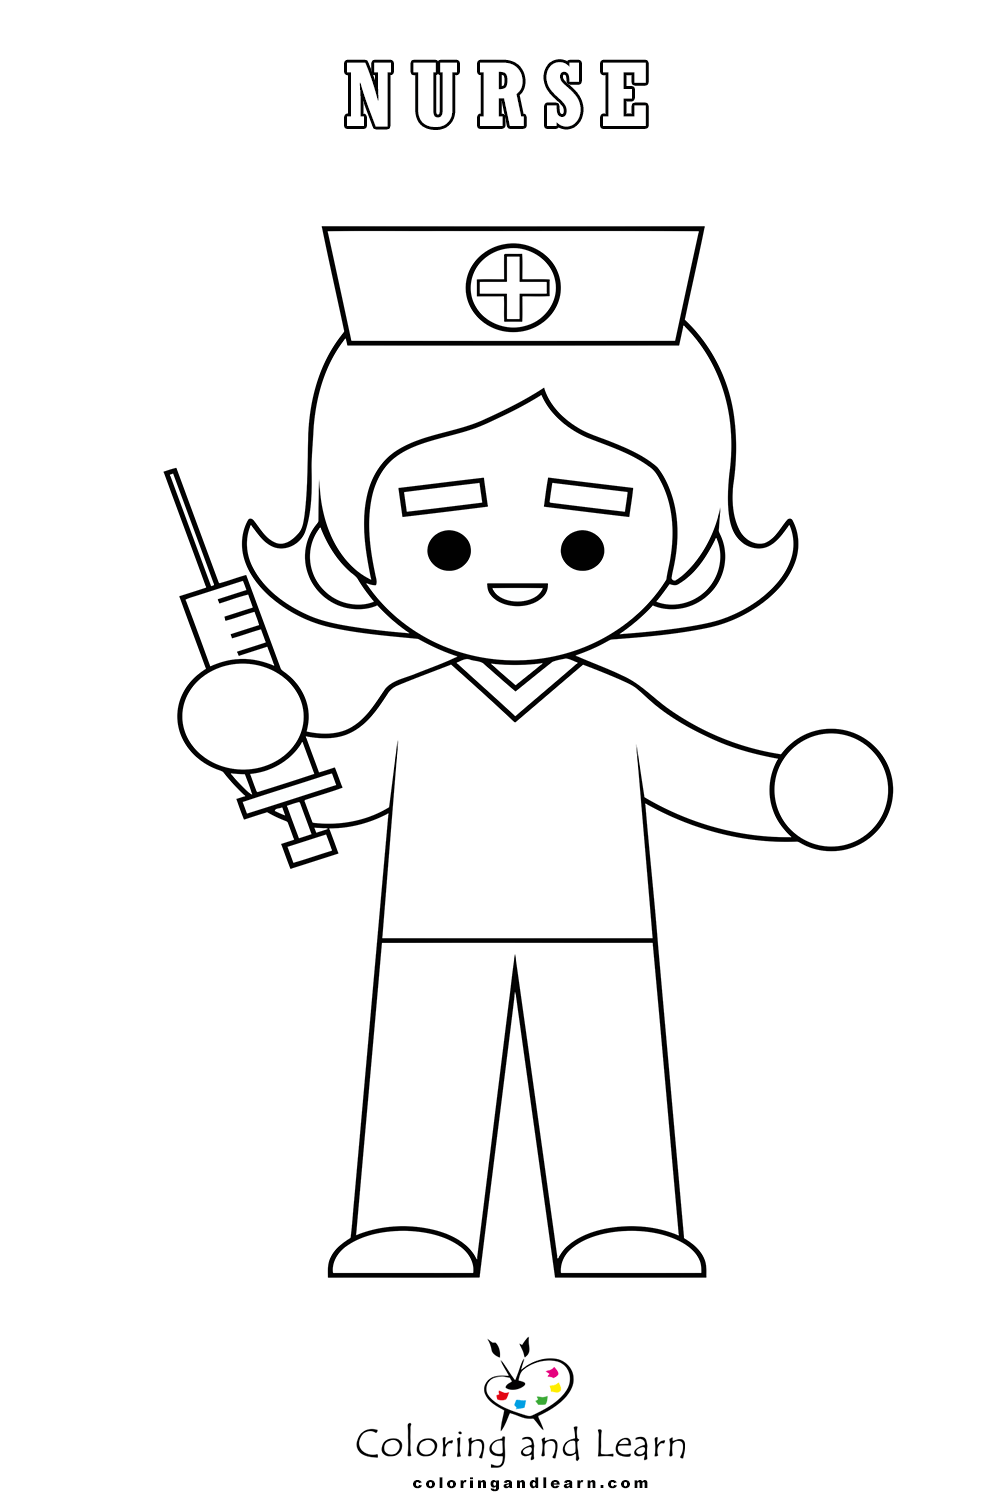 Professions coloring pages